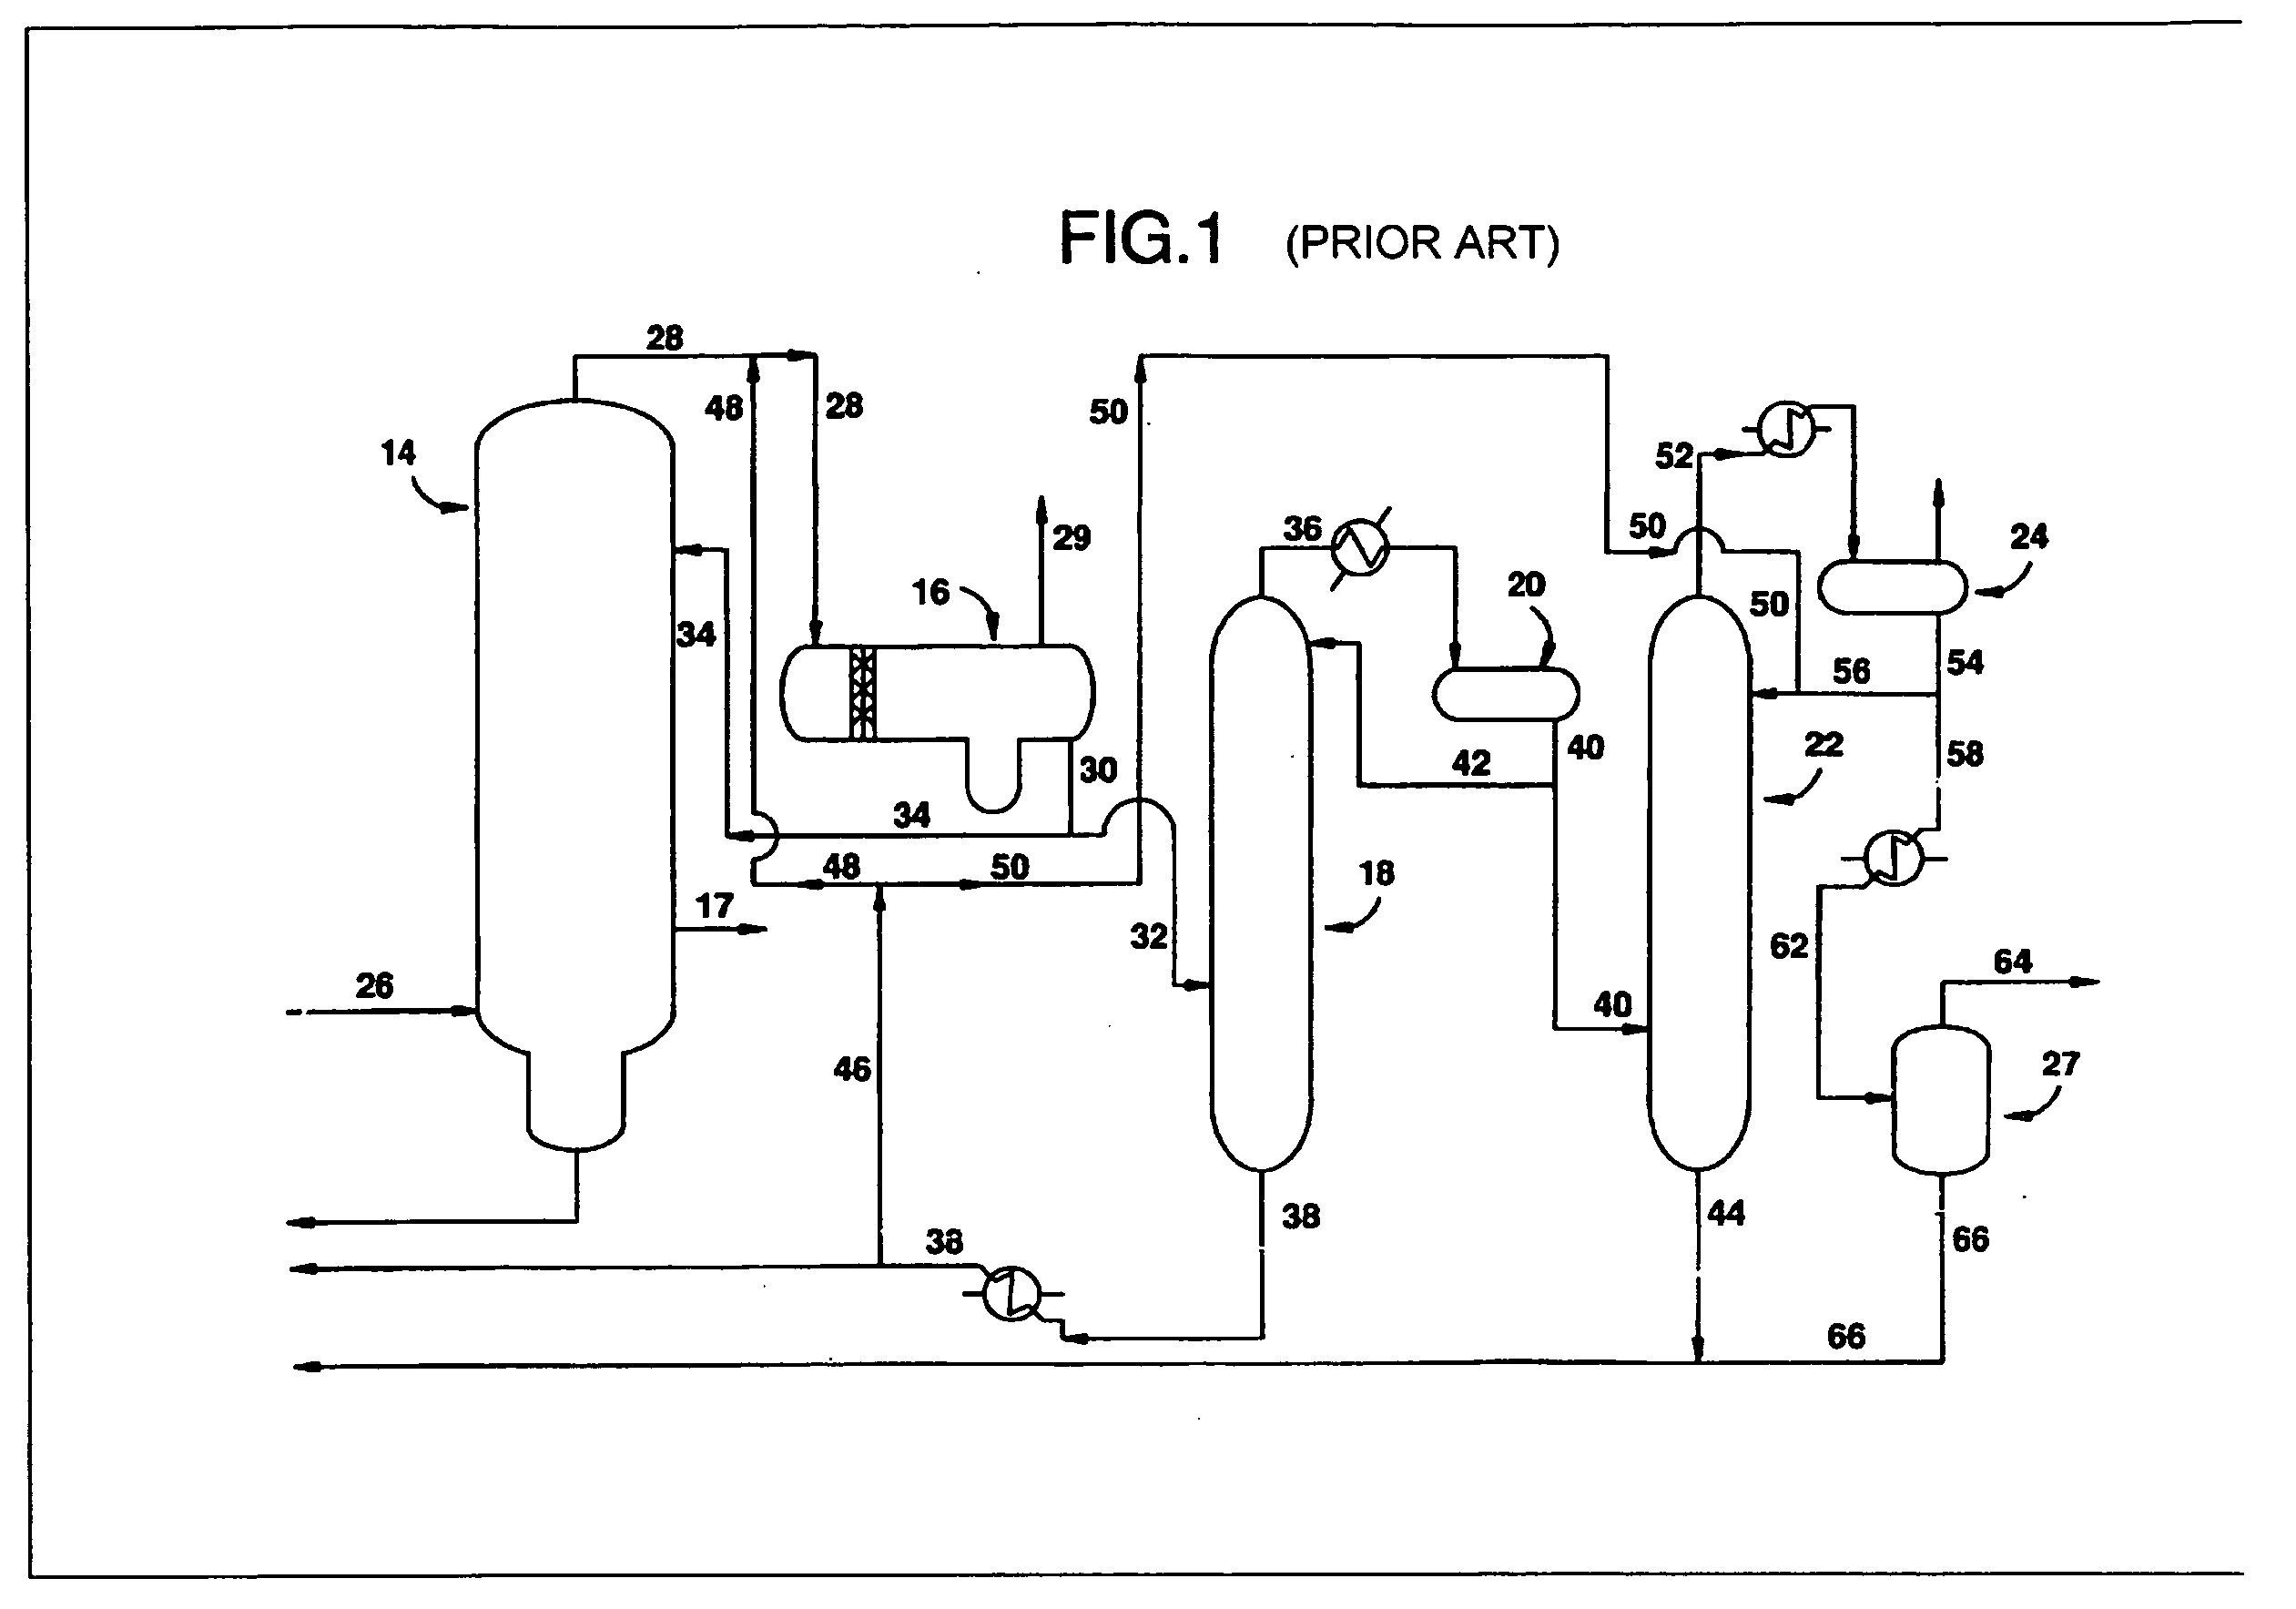 Control method for process of removing permanganate reducing compounds from methanol carbonylation process